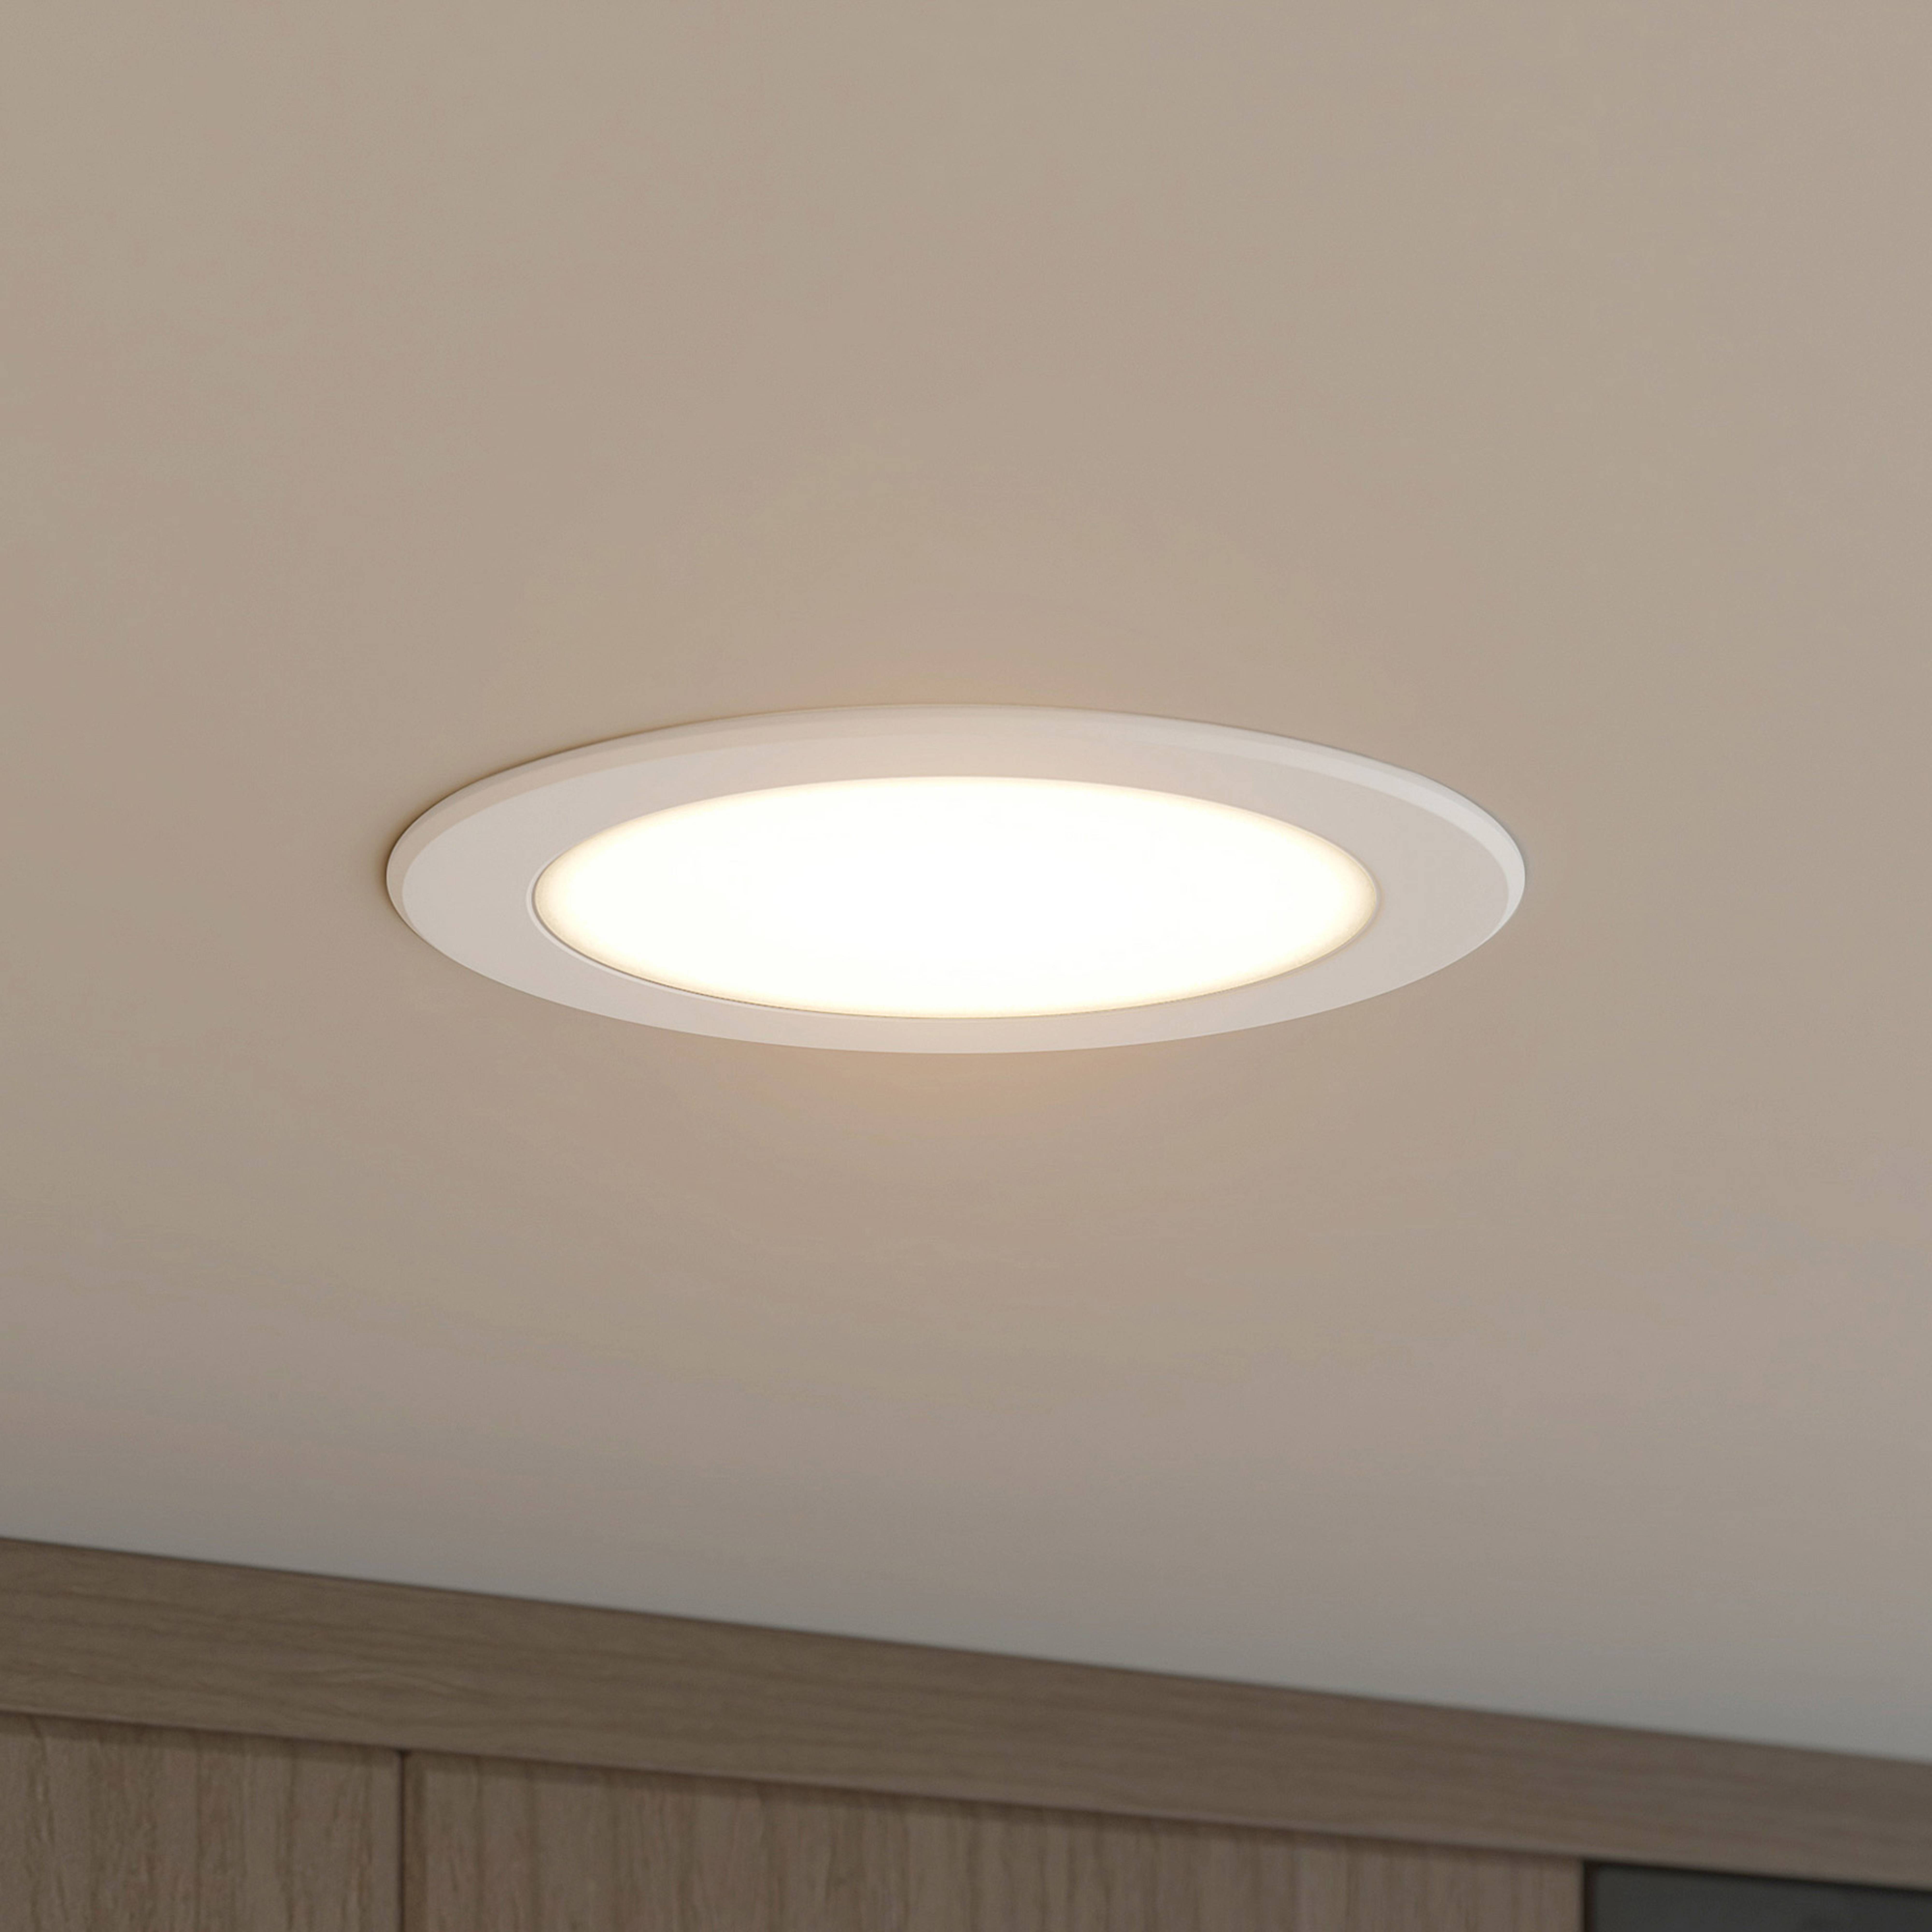 Prios LED recessed spotlight Rida, 14.5 cm, 12 W, CCT, dimmable